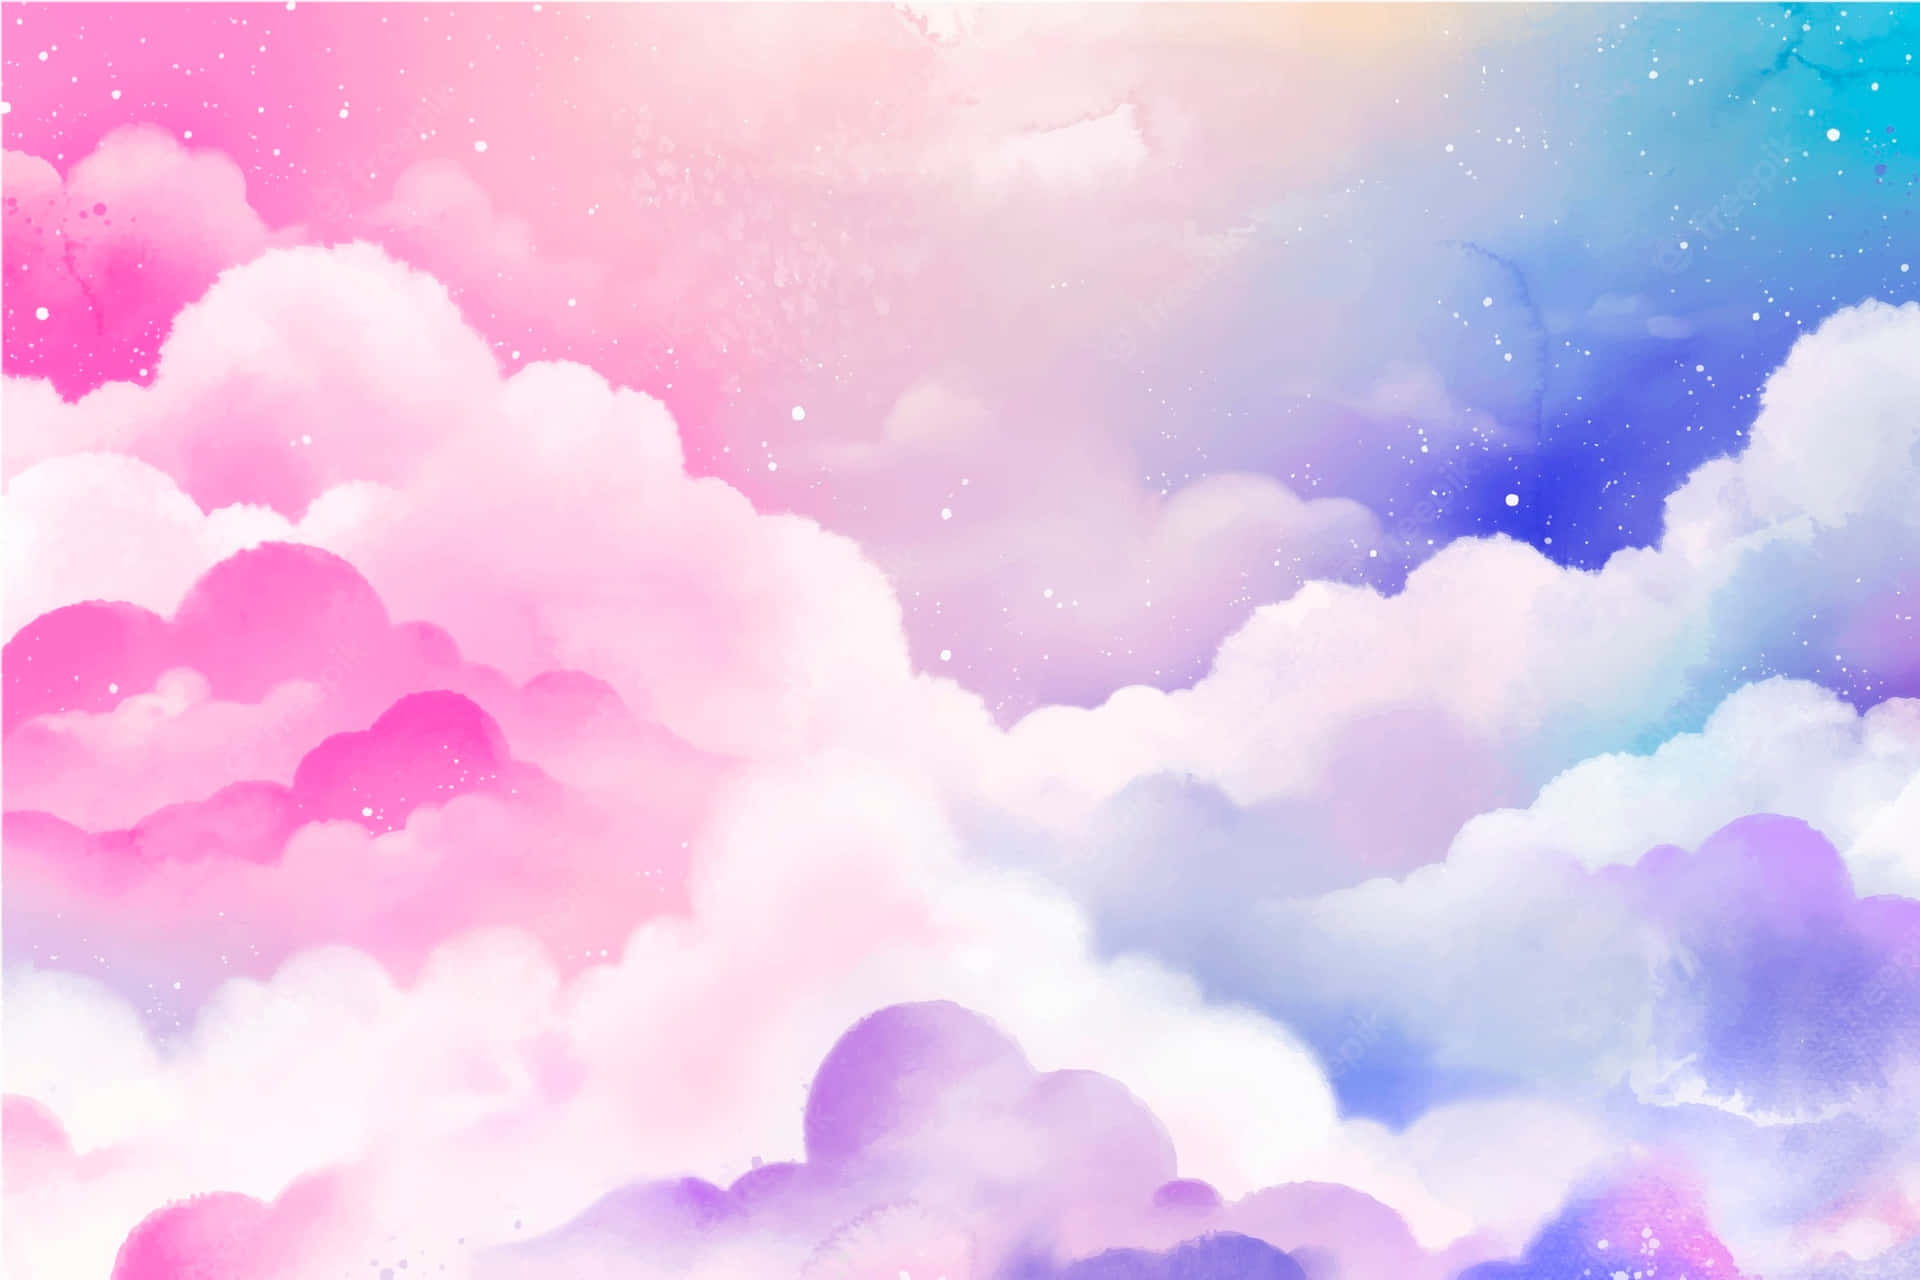 A Watercolor Painting Of Clouds In Pink, Blue And Purple